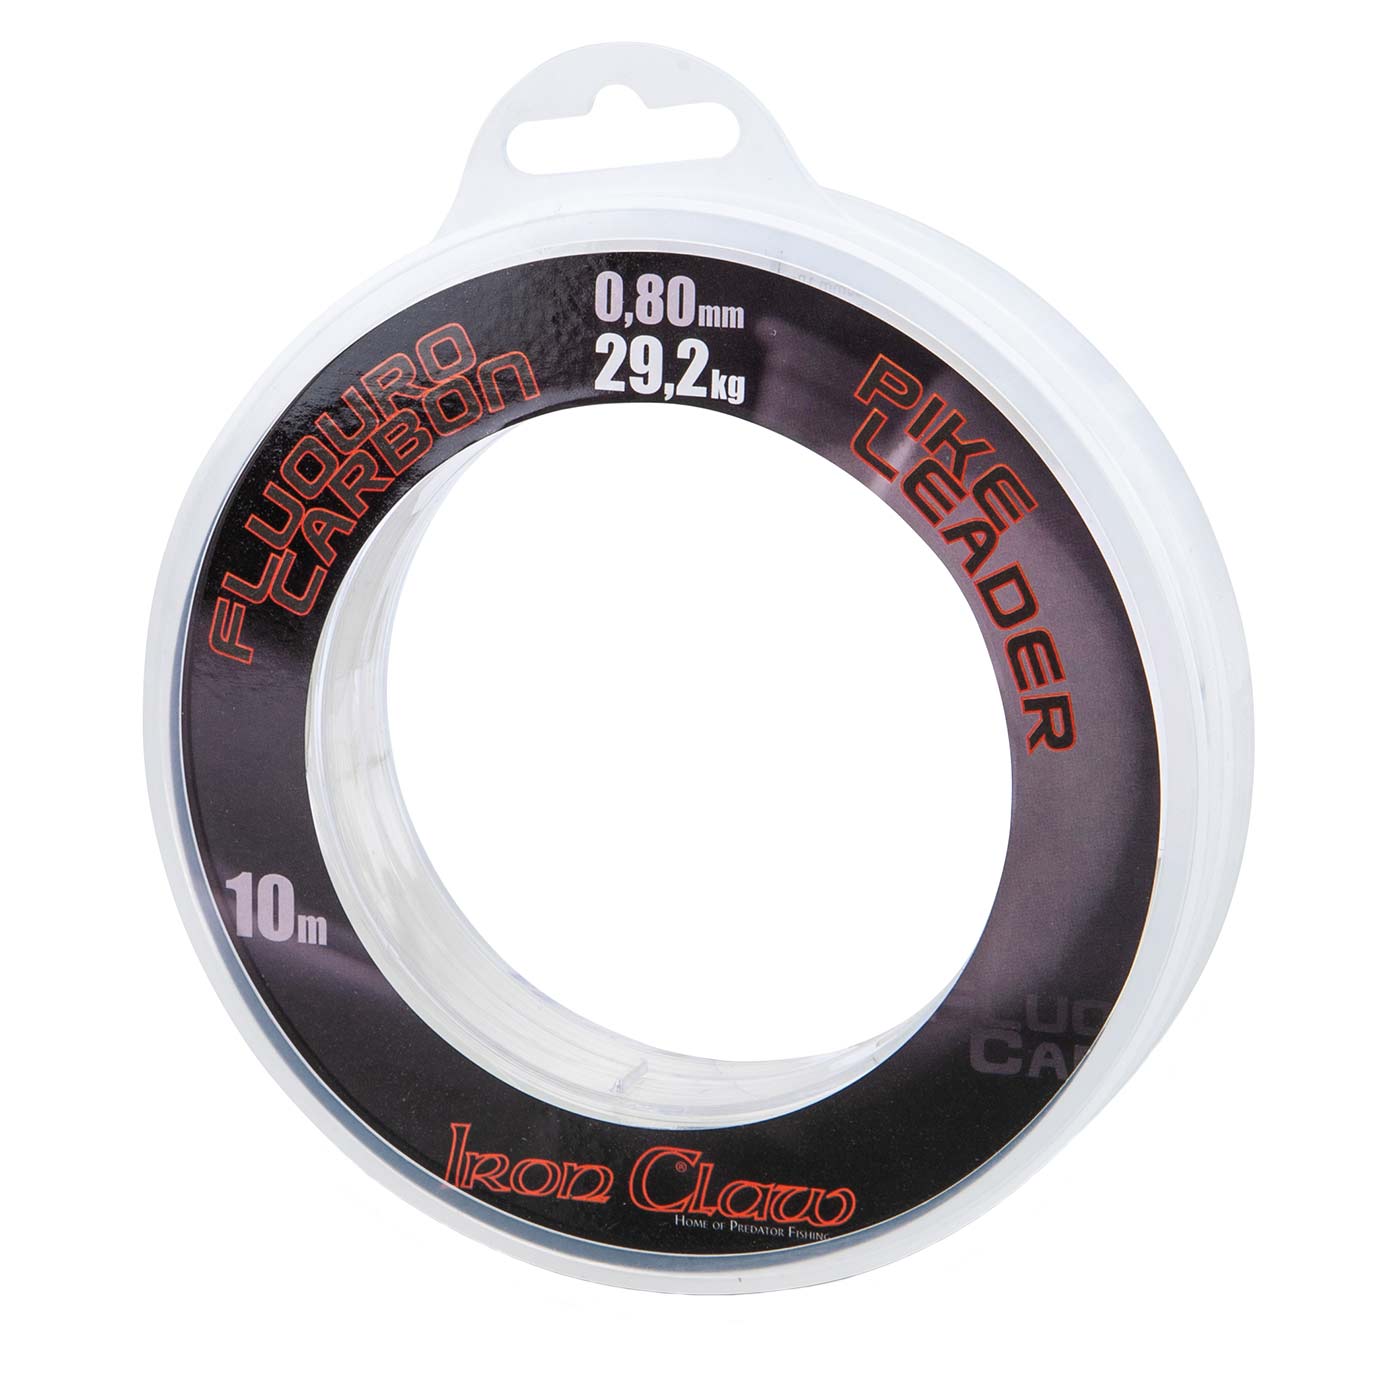 Iron Claw Pike Leader Fluoro Carbon 0,80mm 10m 29,2kg